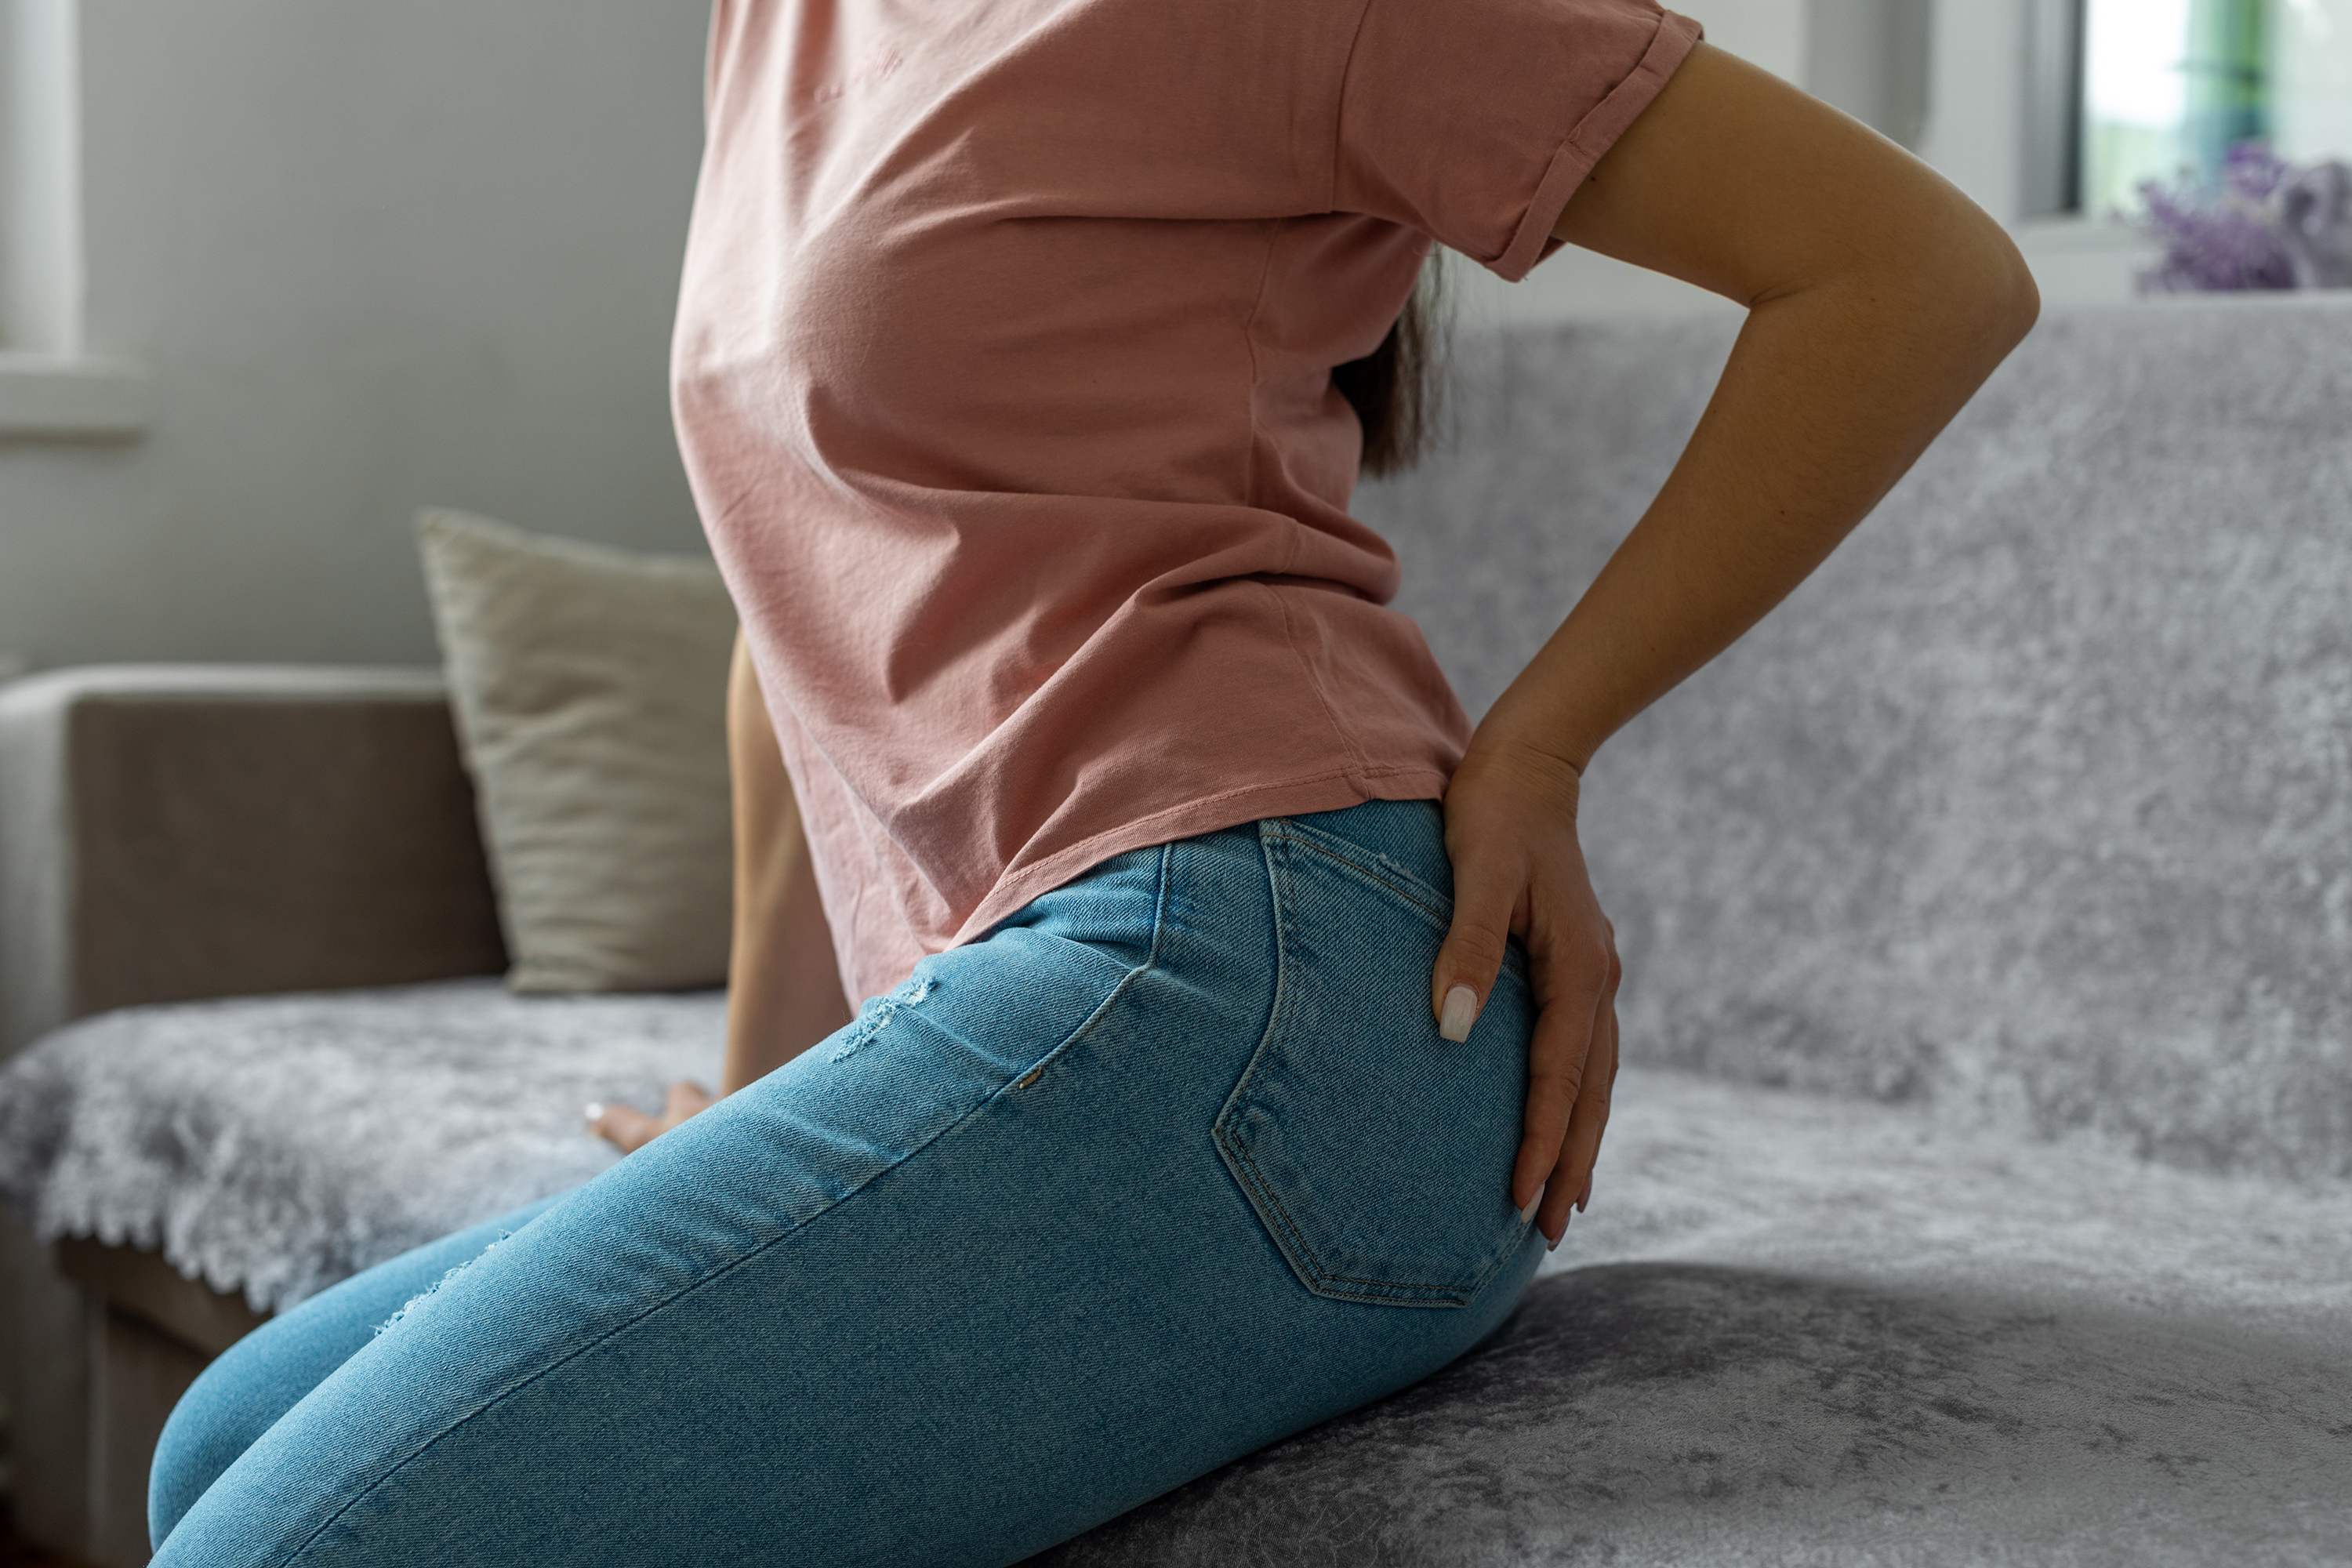 What to Look for in a Pillow if You Have Sciatica